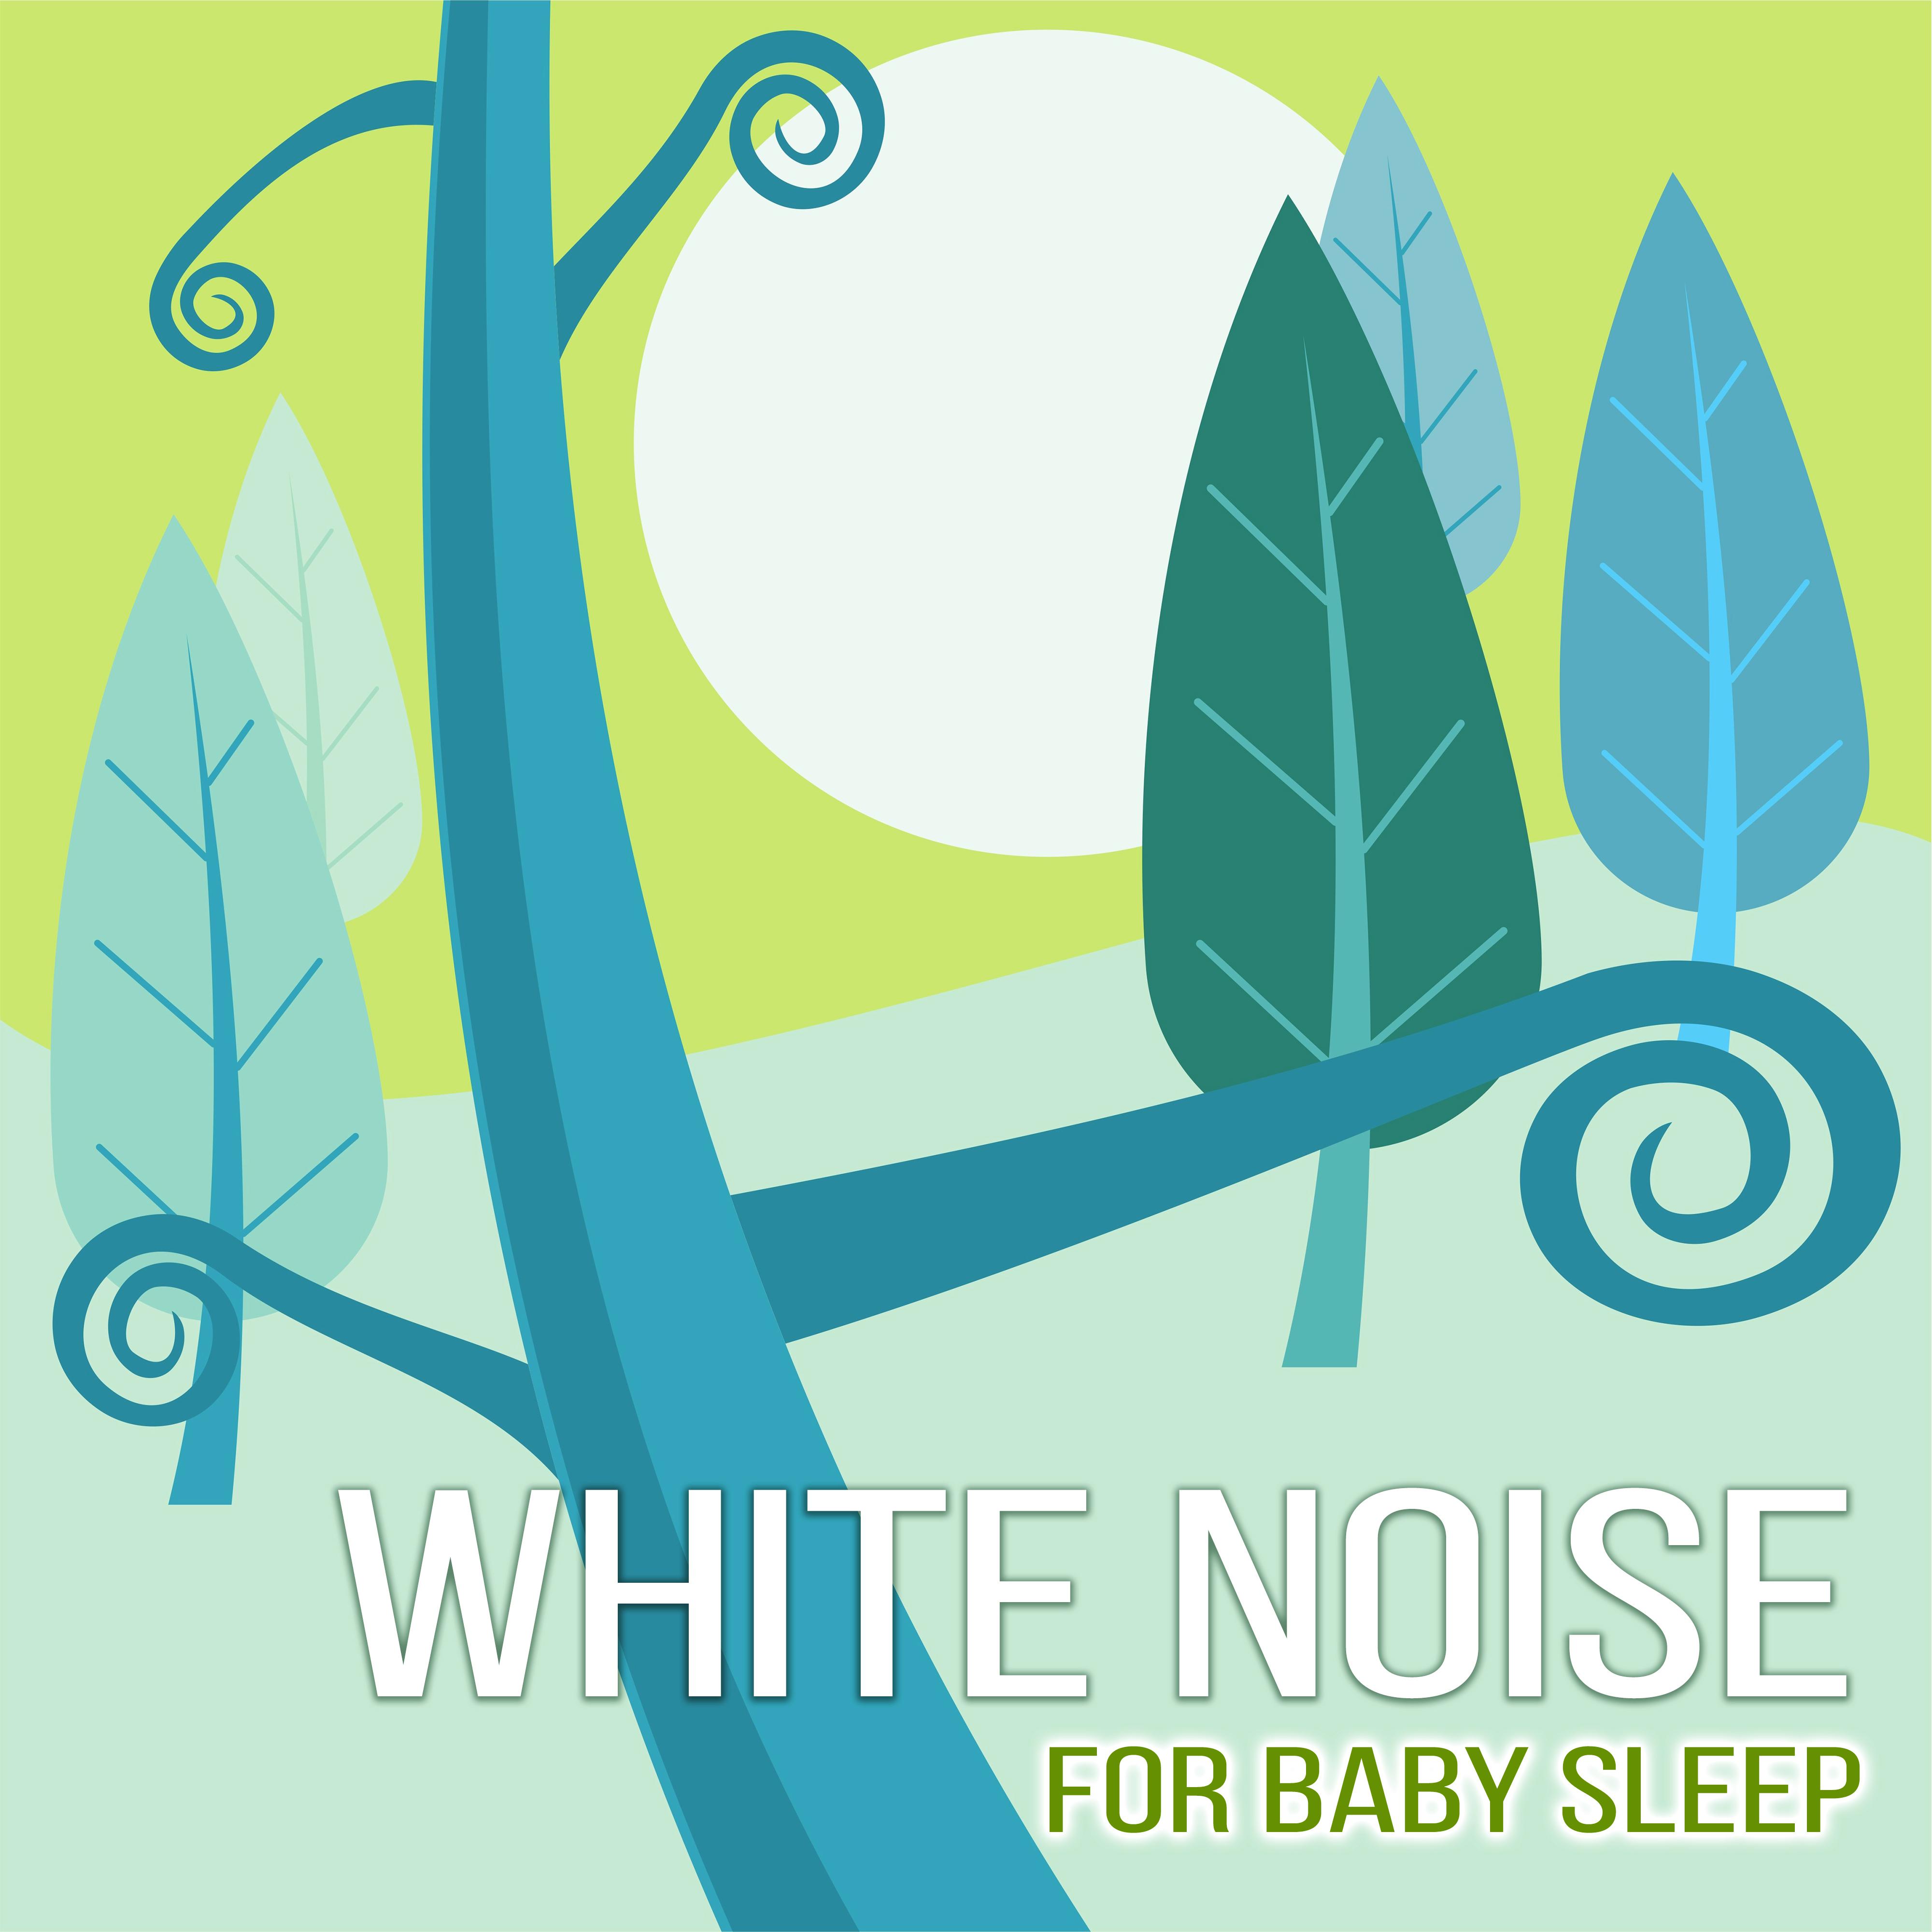 White Noise for Baby Sleep - Calming Sounds for Baby Dreams, Sleep Aid, Newborn Sleep Music Lullabies, Peaceful Nature Sounds, Relaxation Meditation and Relaxing Sleep Songs